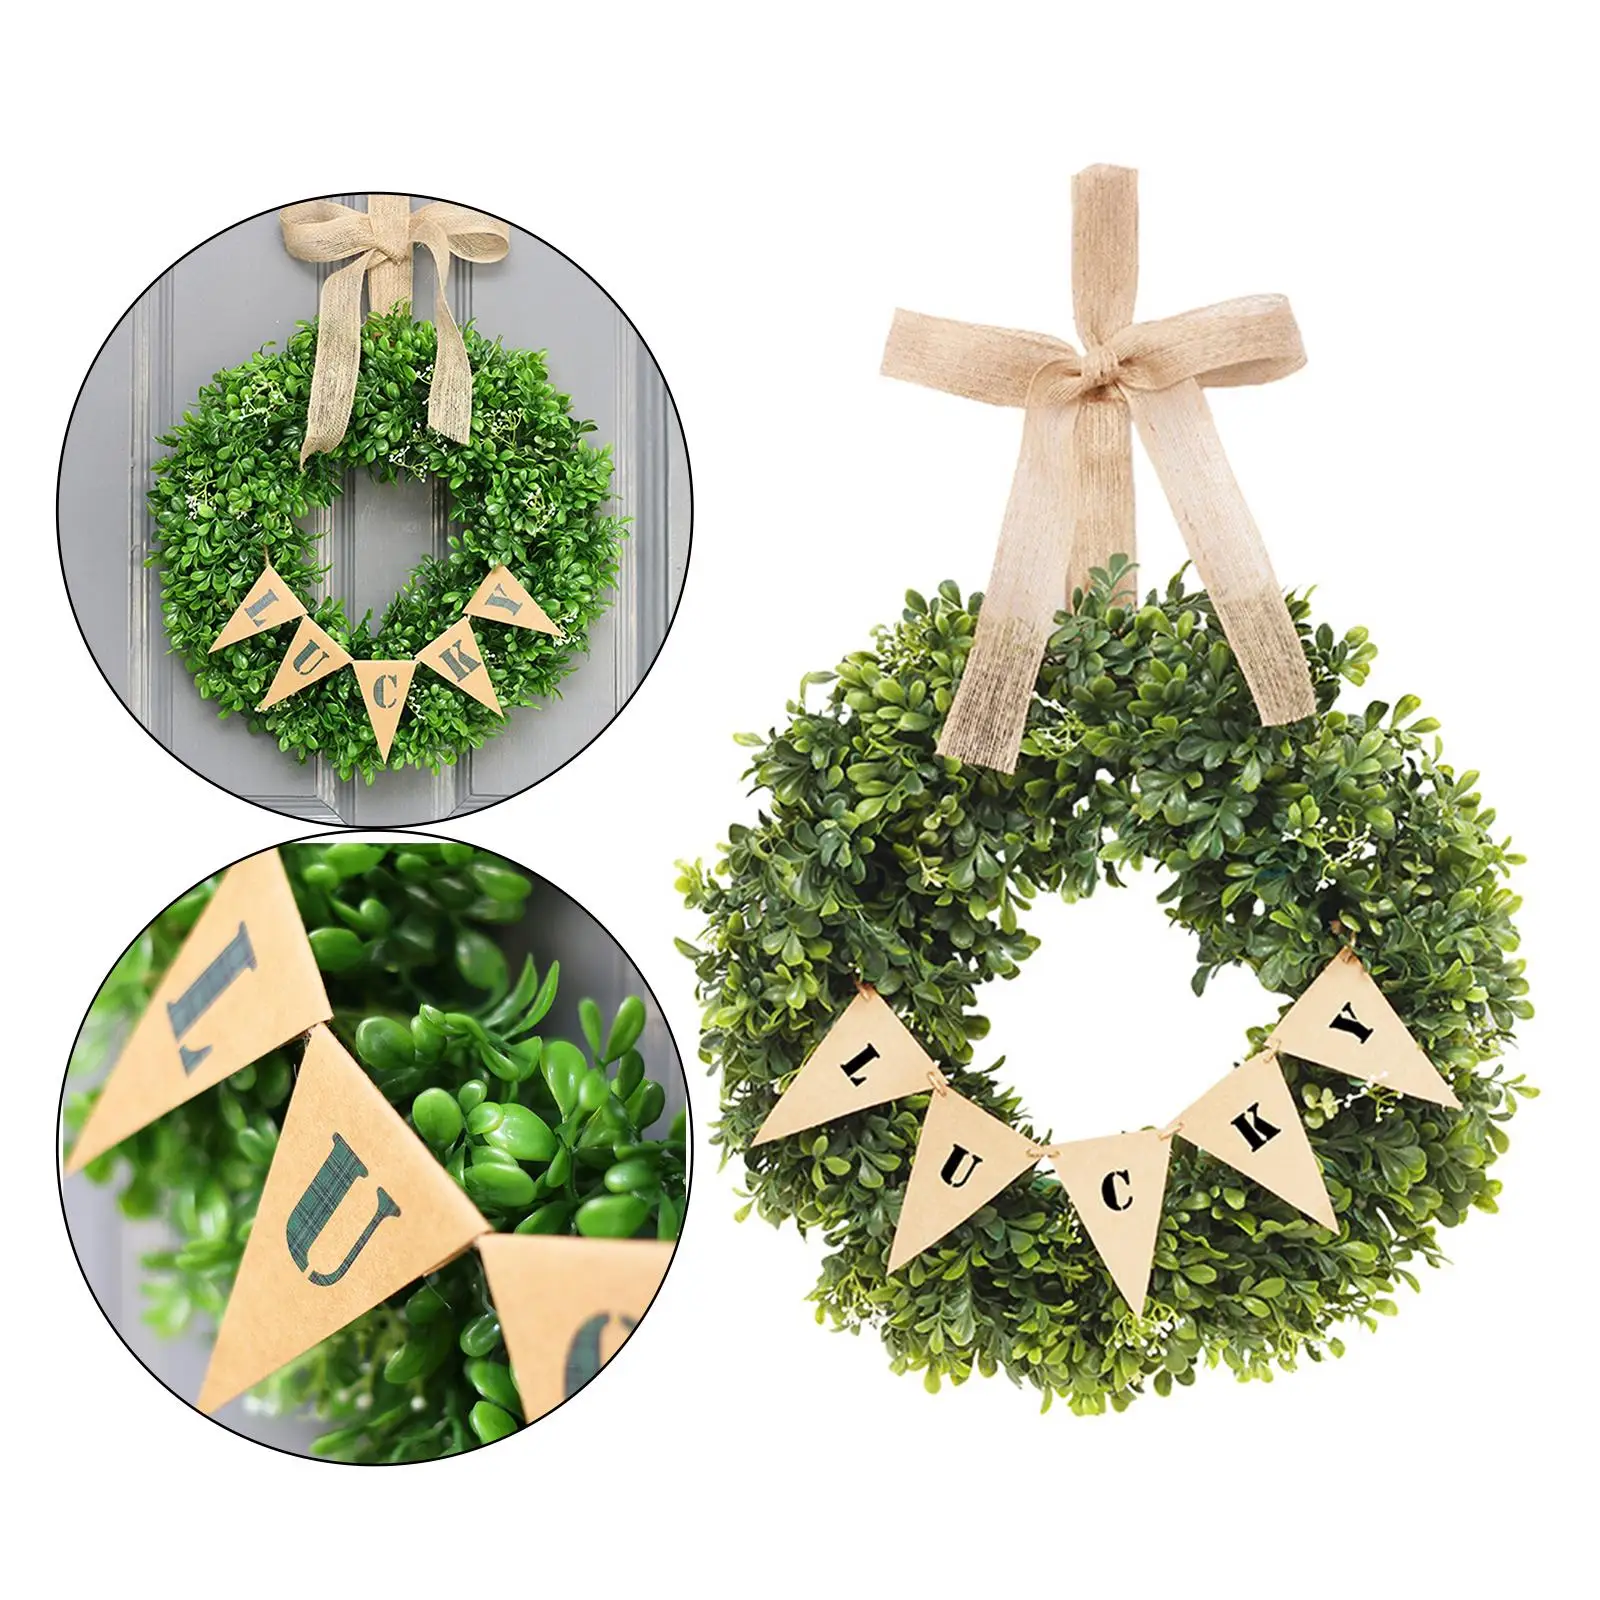 40cm Green Leaves Garland Hanging Greenery Wreath Window Party Decor Handmade Crafted ,Brighten up Your House Indoor Outdoor